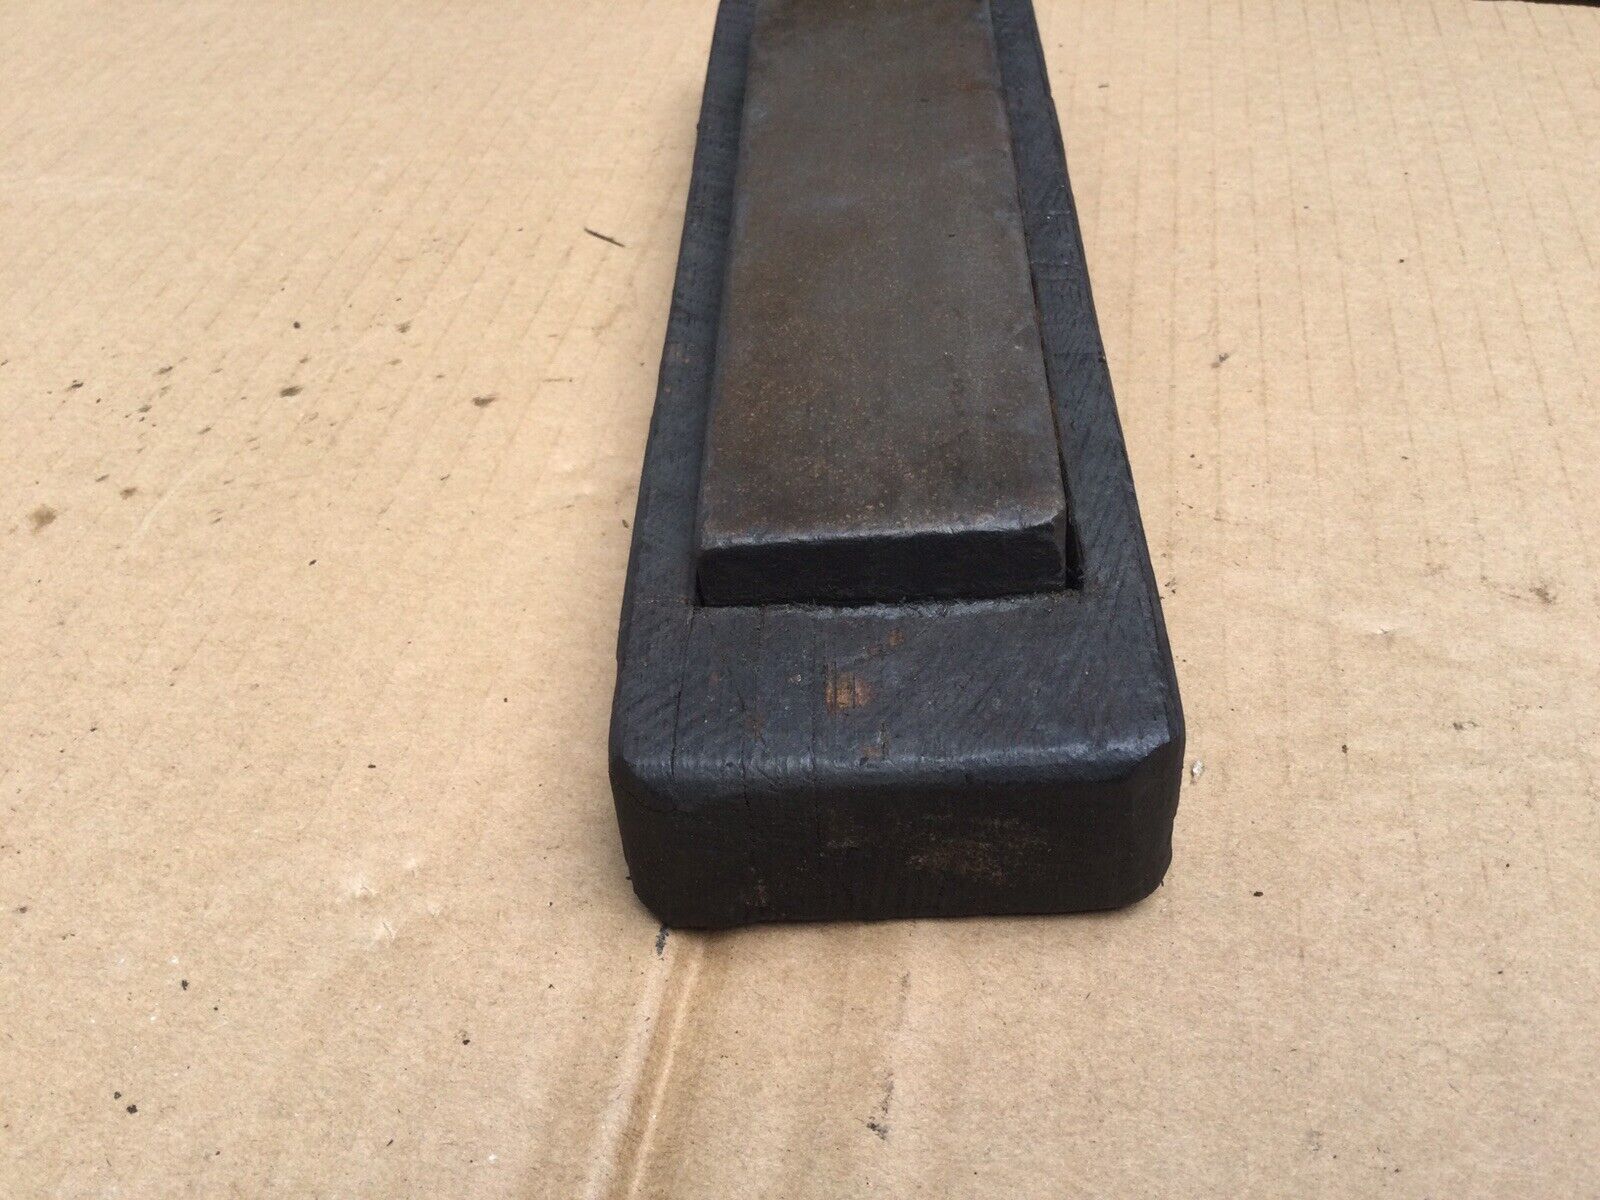 Old Sharpening Oil Stone 7 X 2 X 1”, Wood Case, Fine Grit Honing Stone, See Desc